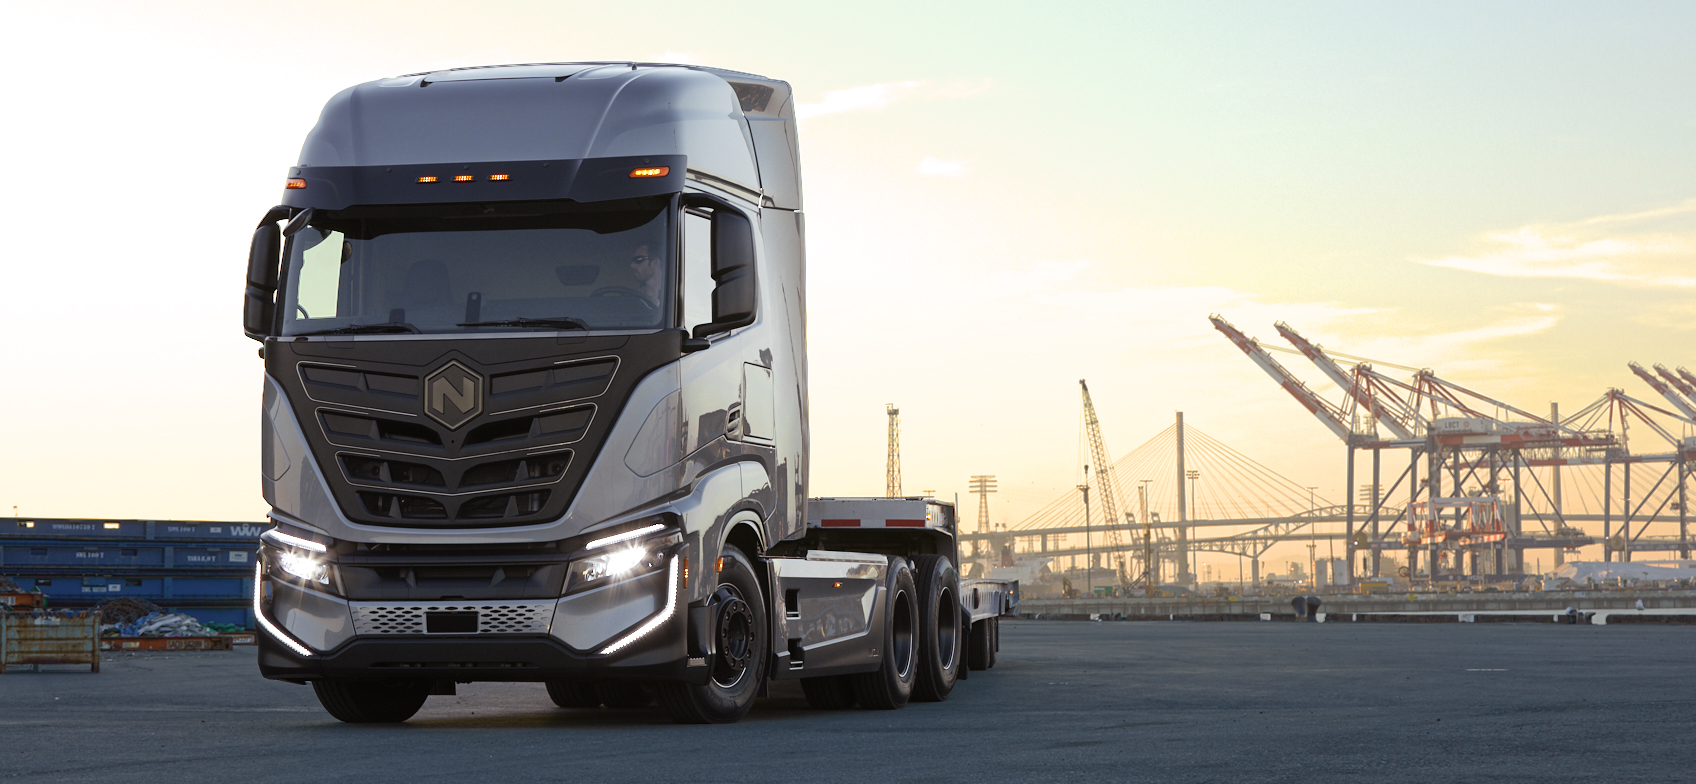 Nikola plans to ramp up production of the Tre electric semi-truck in March